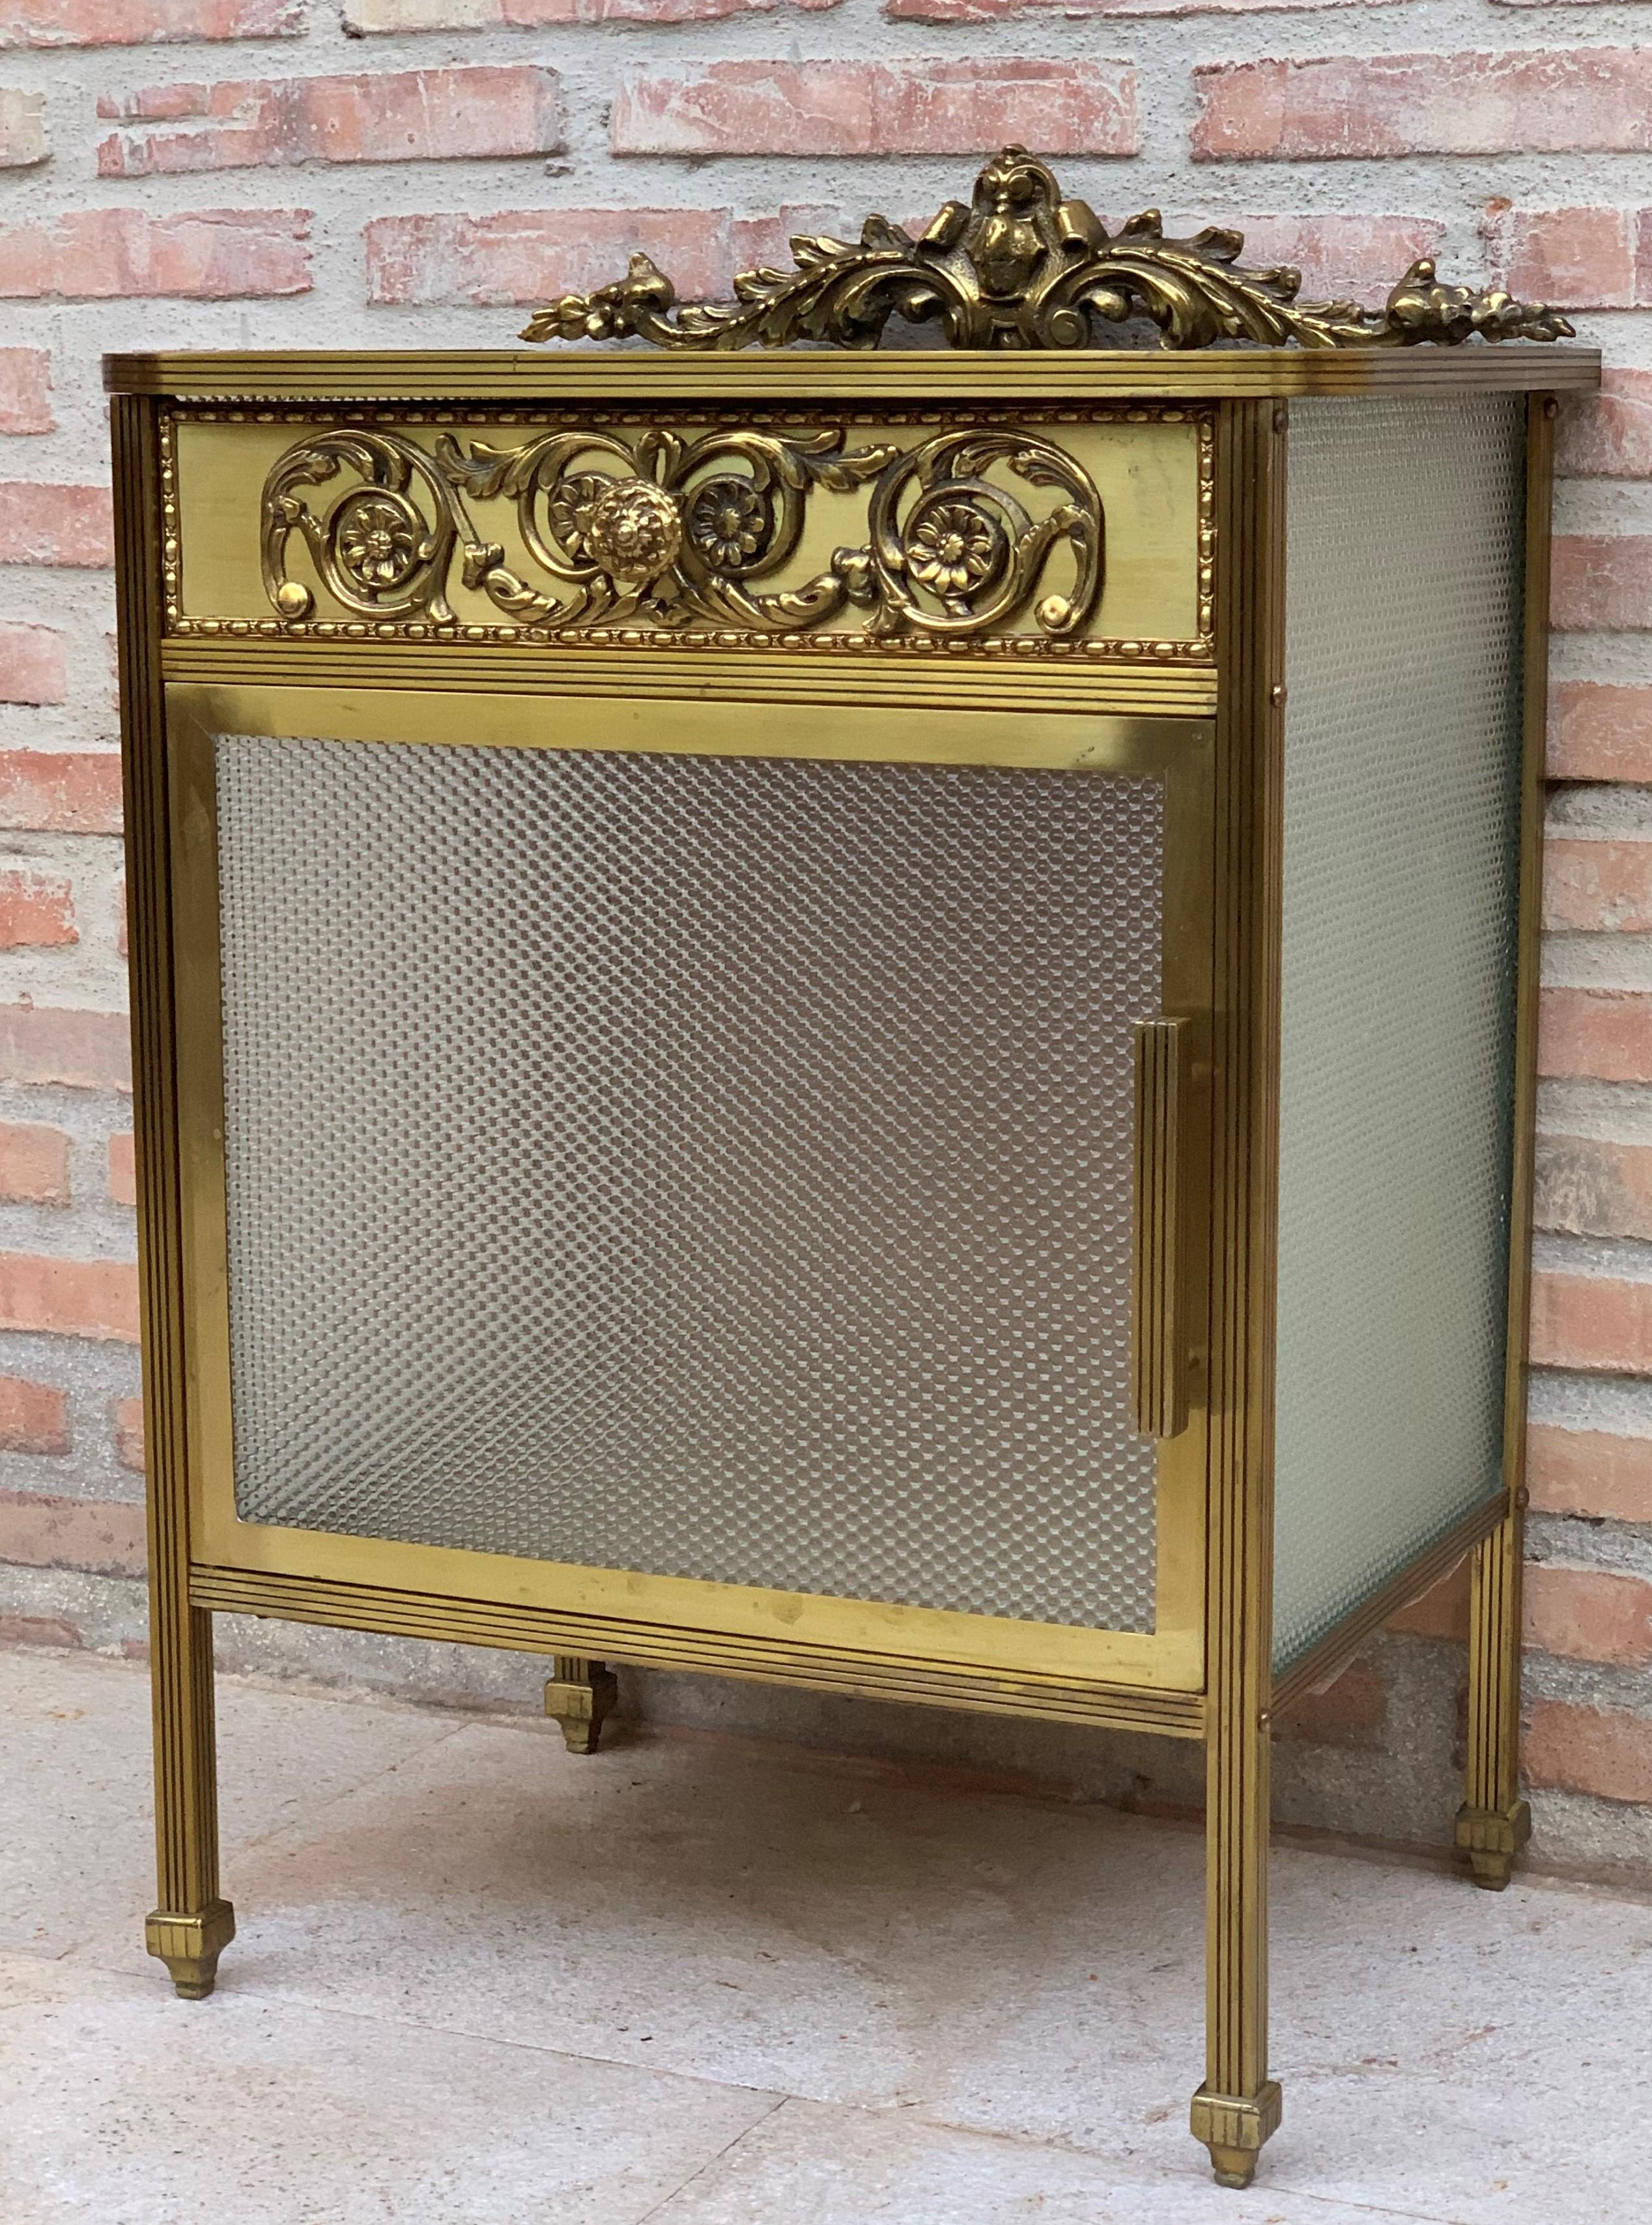 20th century single bronze nightstand with glass door and drawers.

This bronze or glass vitrine cabinet or nightstand is simply stunning and constructed of the finest quality. The bronze mounts of fine form with a single drawer over an open glass